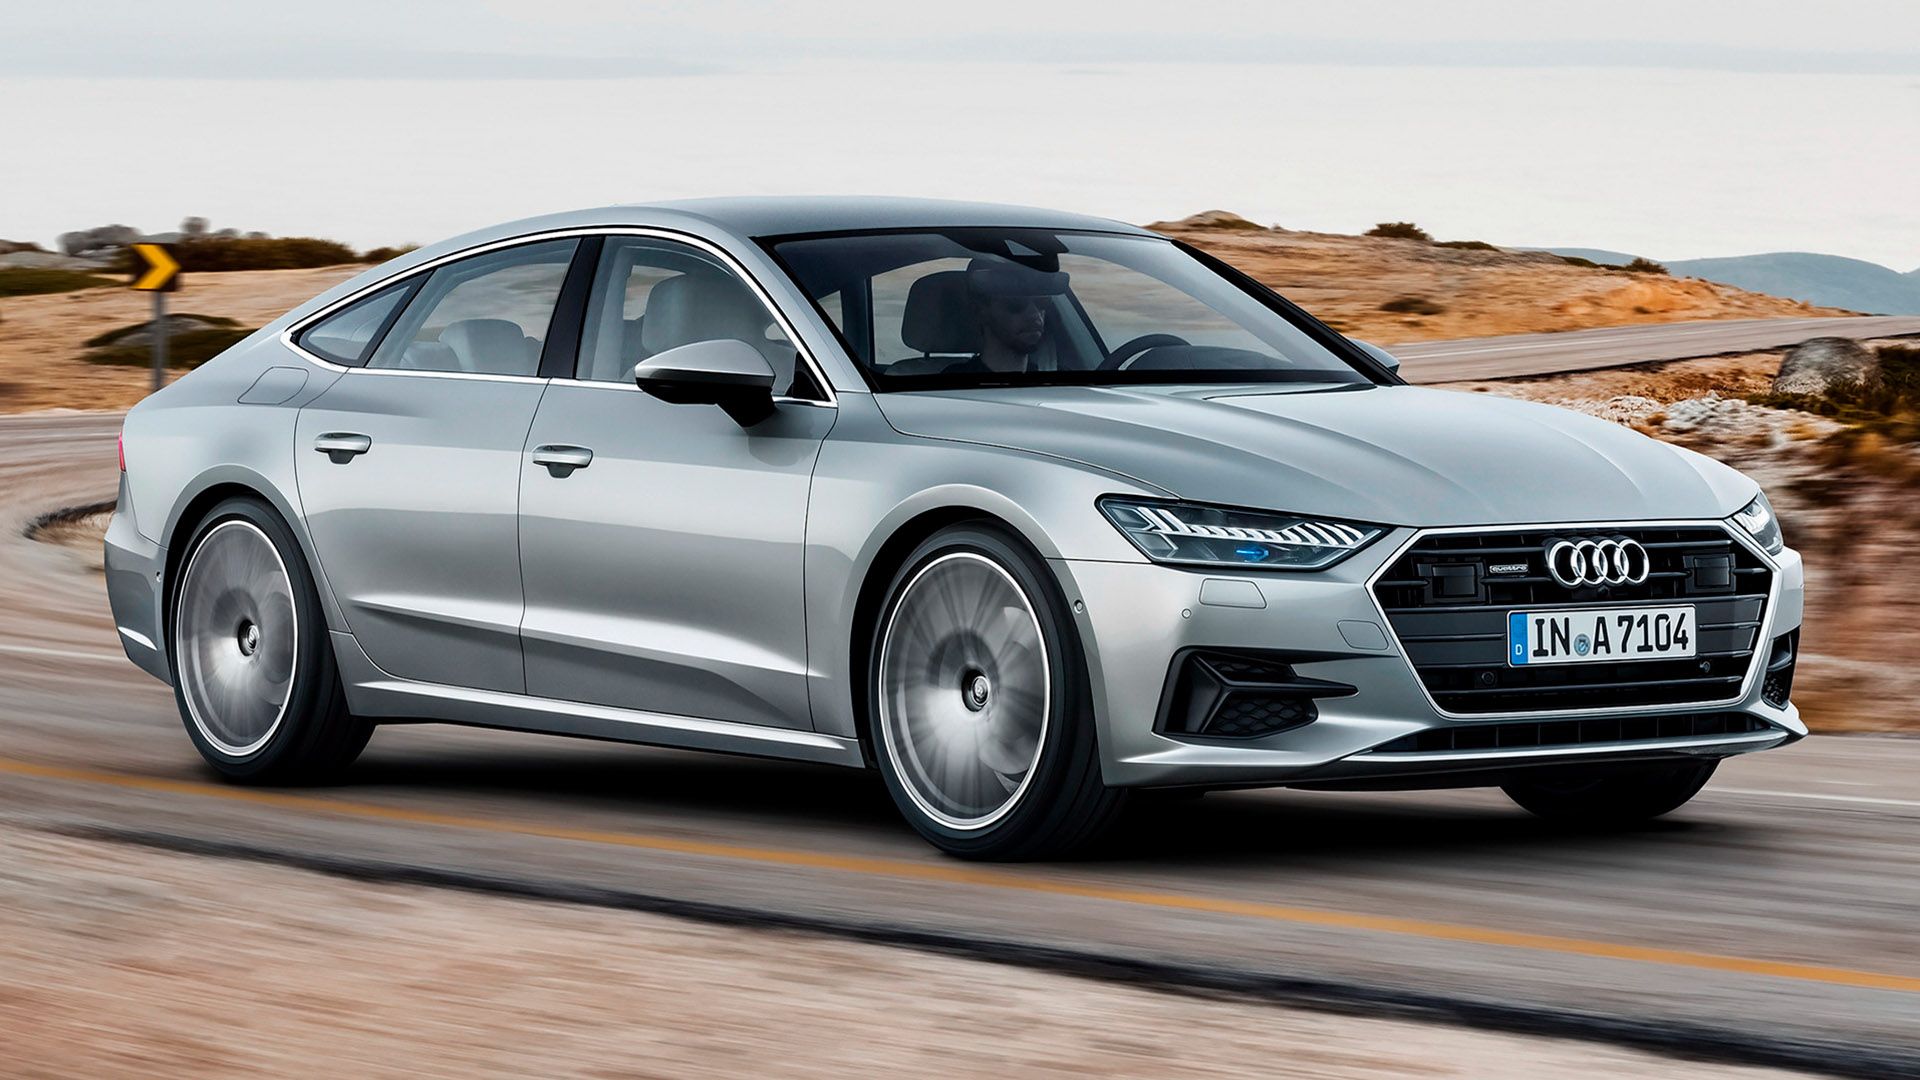 Silver Audi A7 Sportback drives on a road